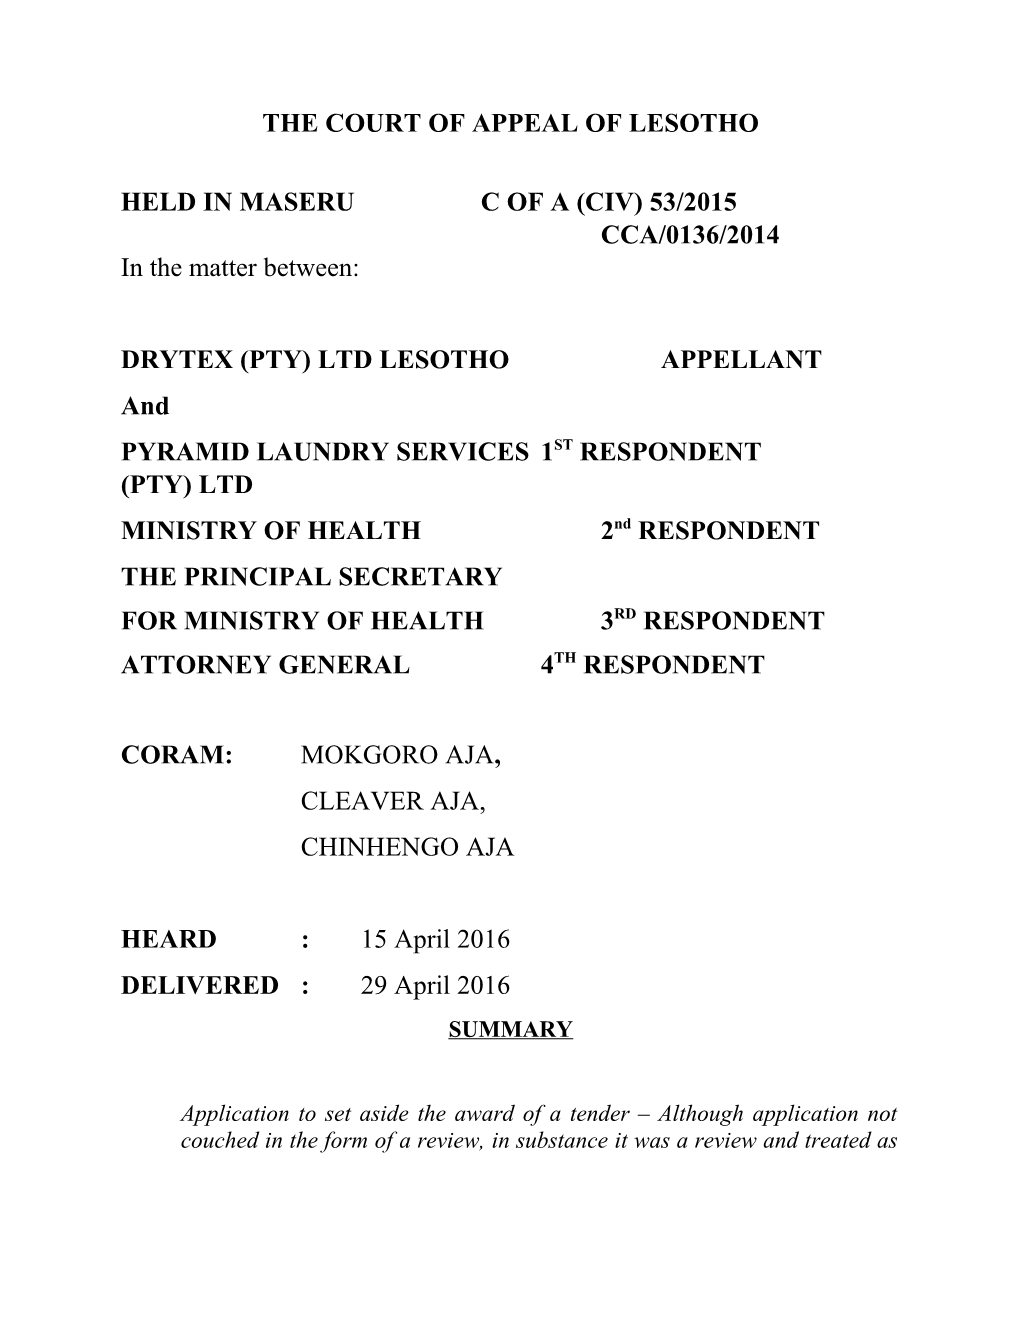 The Court of Appeal of Lesotho